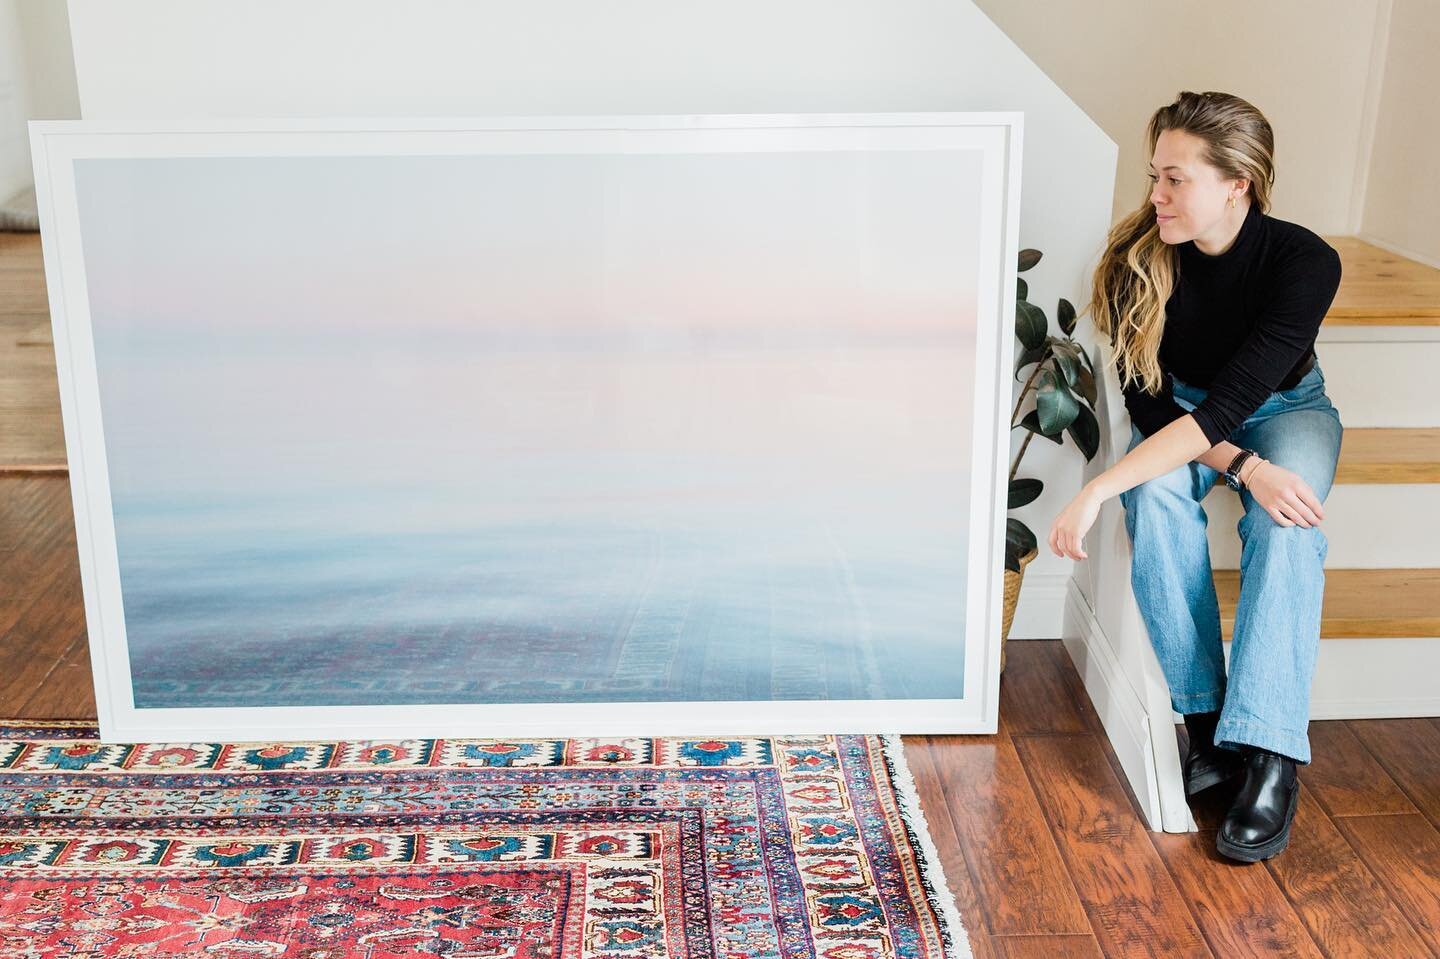 I&rsquo;m so in love with these XL size prints!  I can&rsquo;t wait to see some of the winter collection blown up huge like this, some sneak peeks of the new collection will be coming soon! 😉
.
#georgianbay #georgianbaylife #georgianbayliving #colli